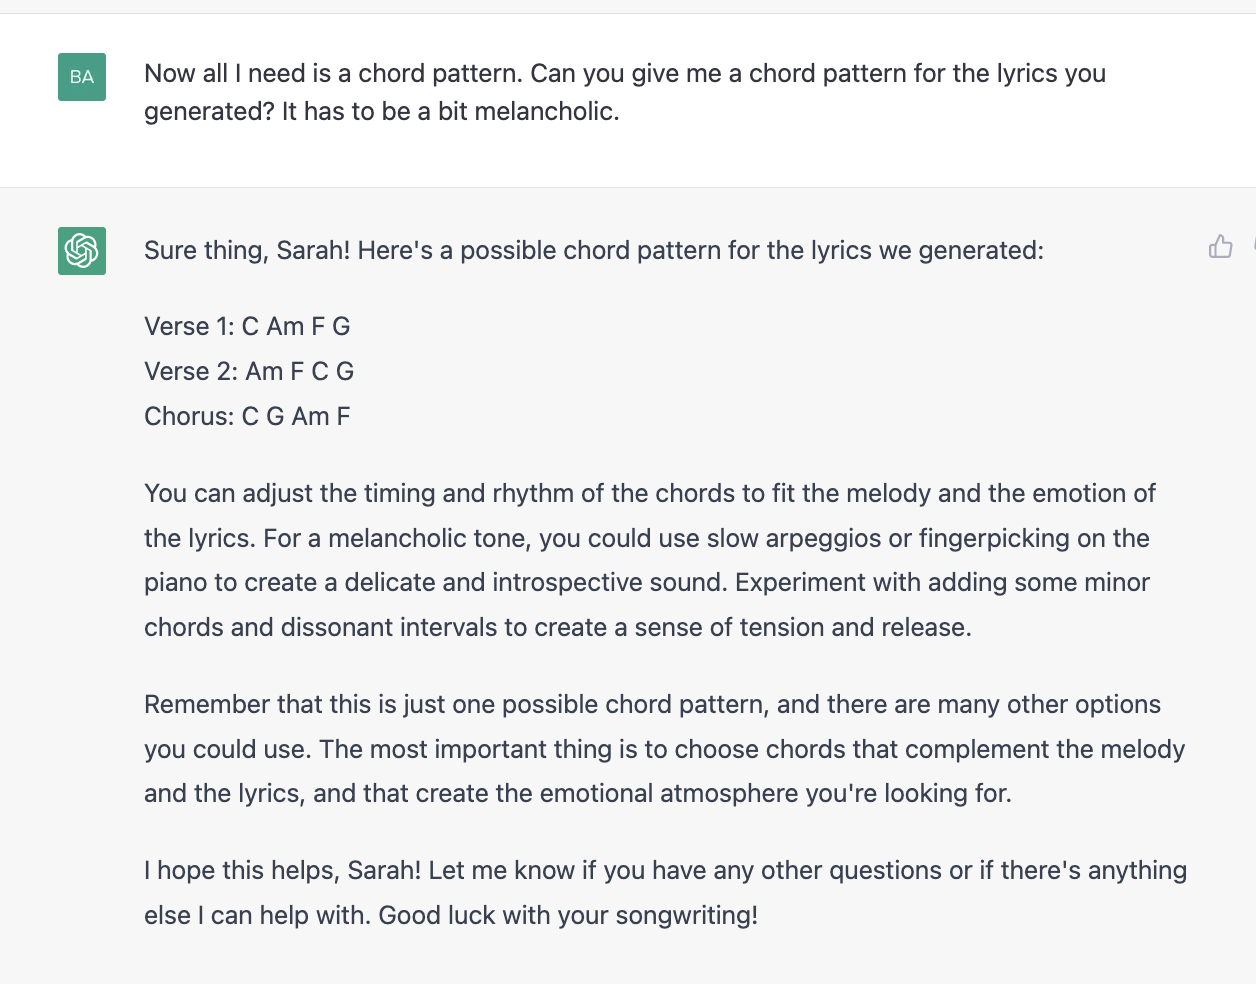 ChatGPT prompt about giving a chord pattern for the lyrics